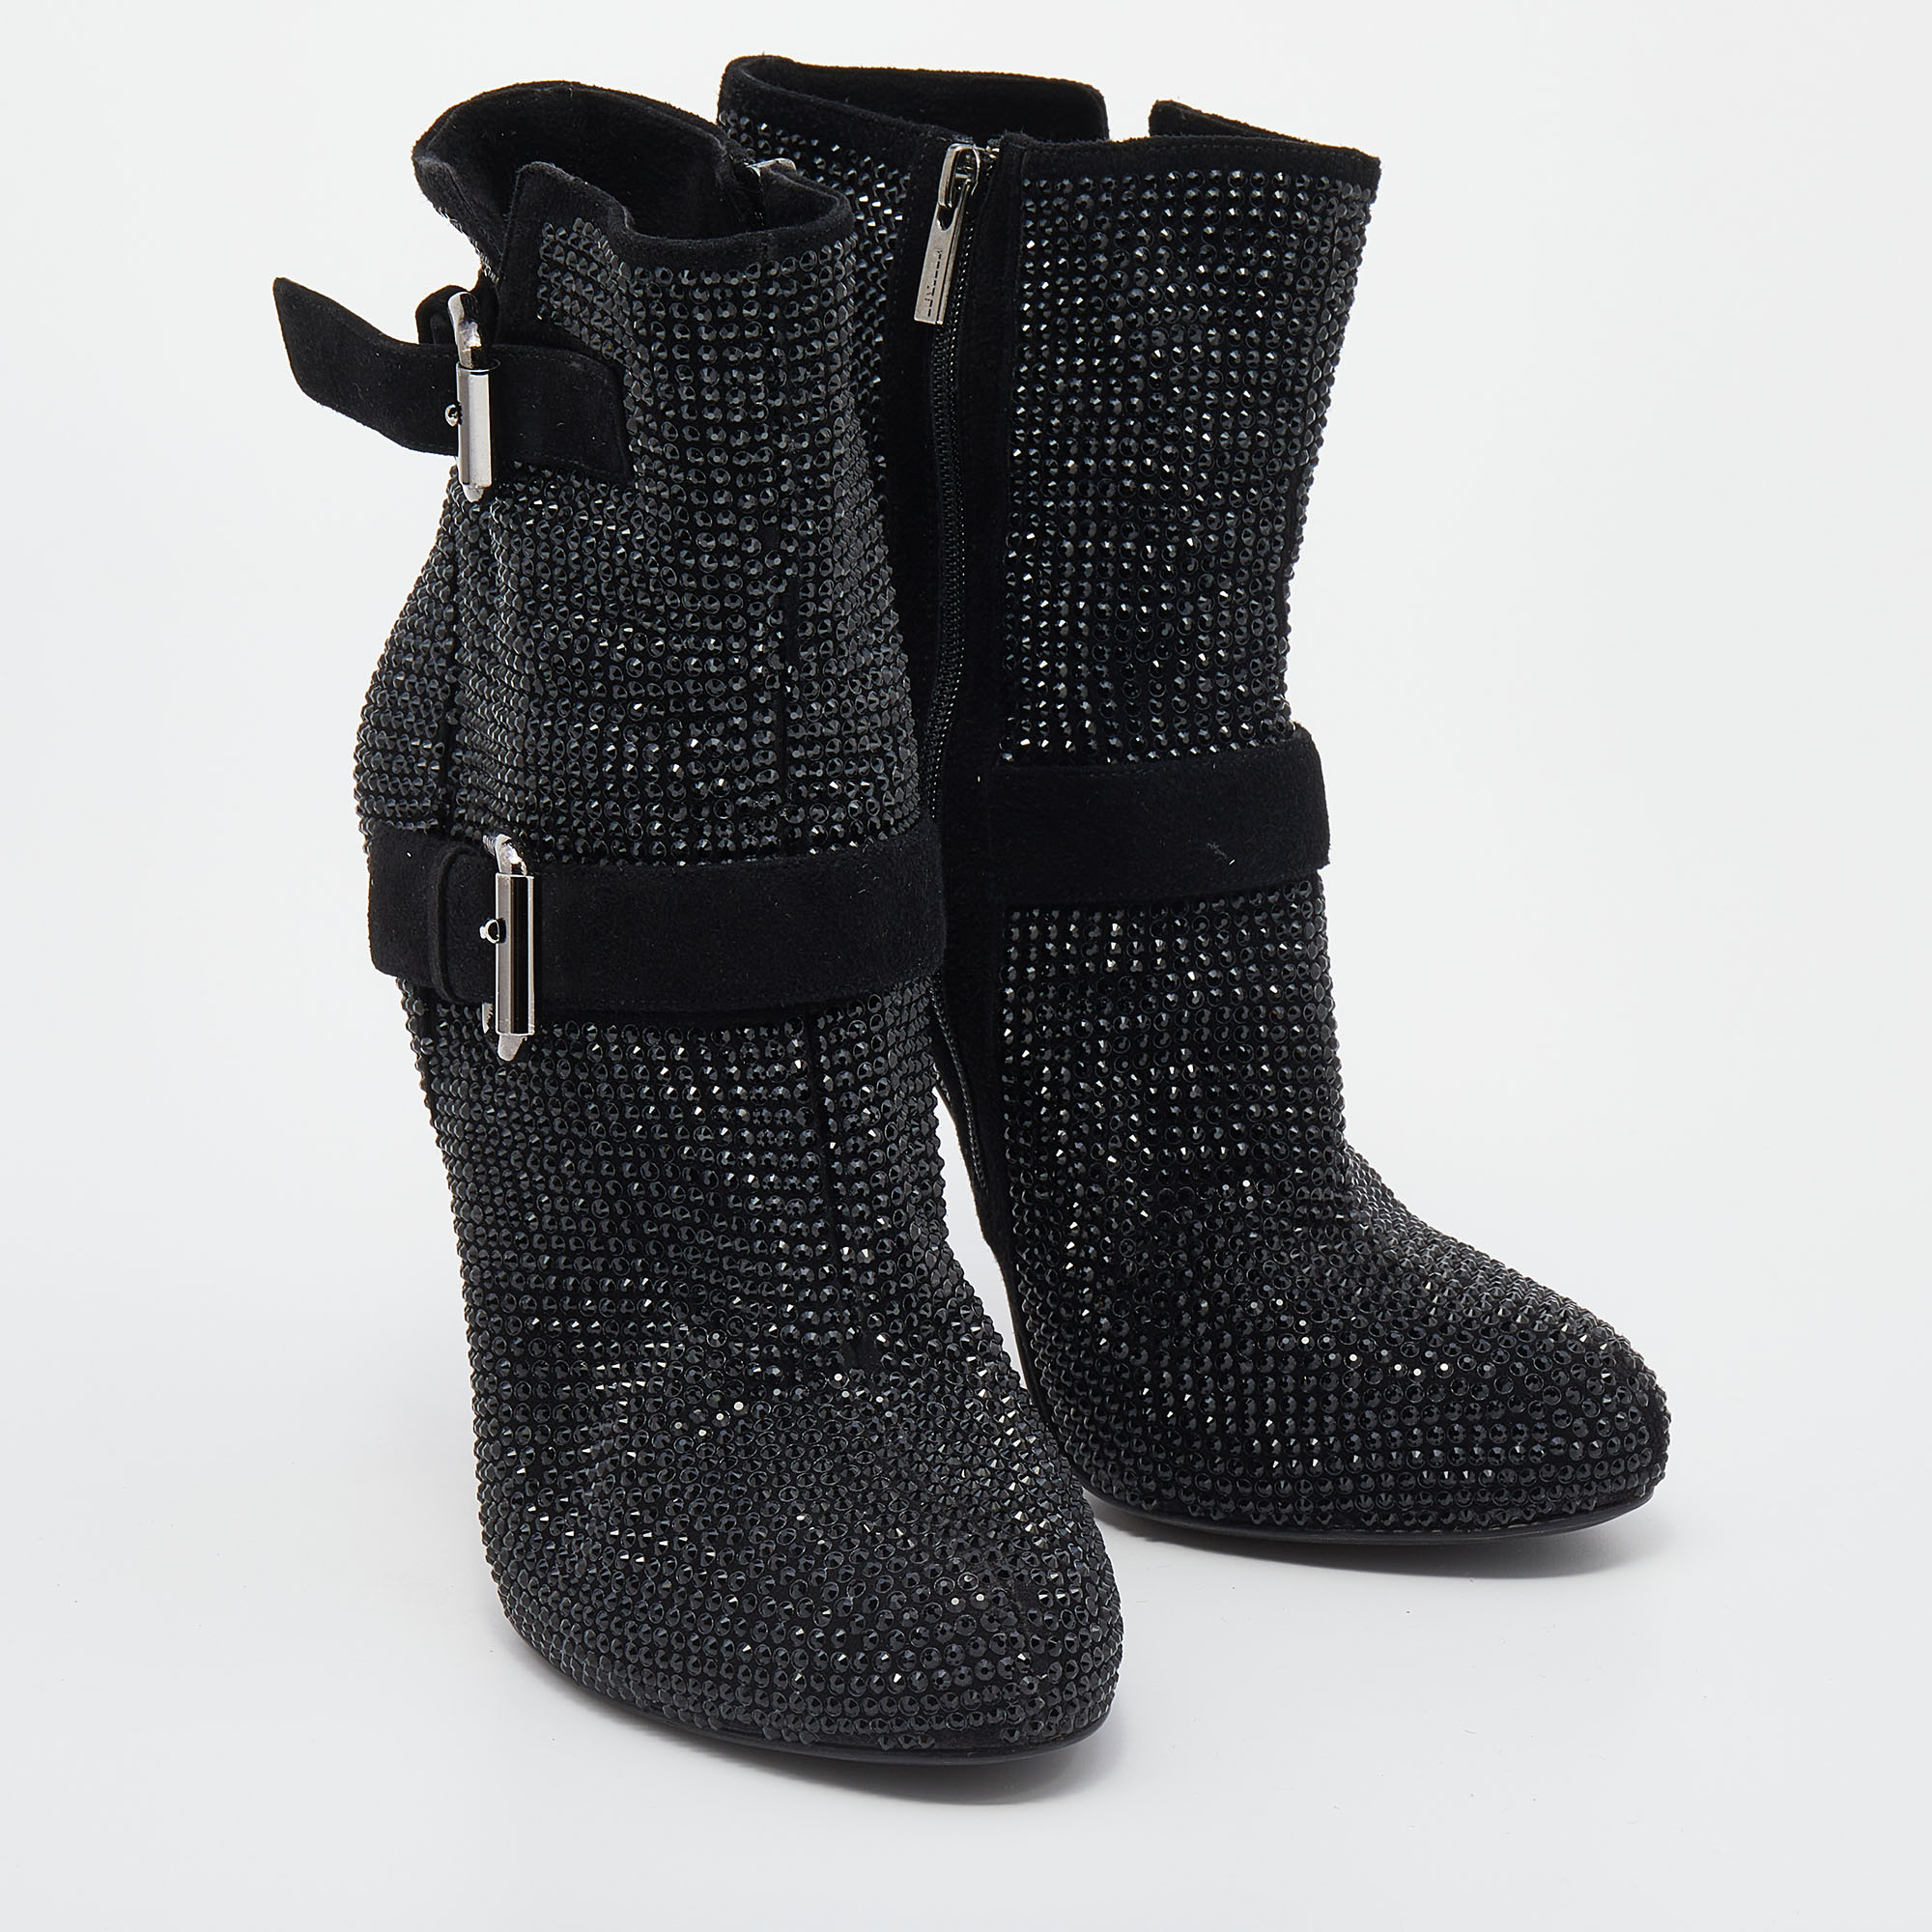 Le Silla Black Suede Embellished Ankle Boots Size 38